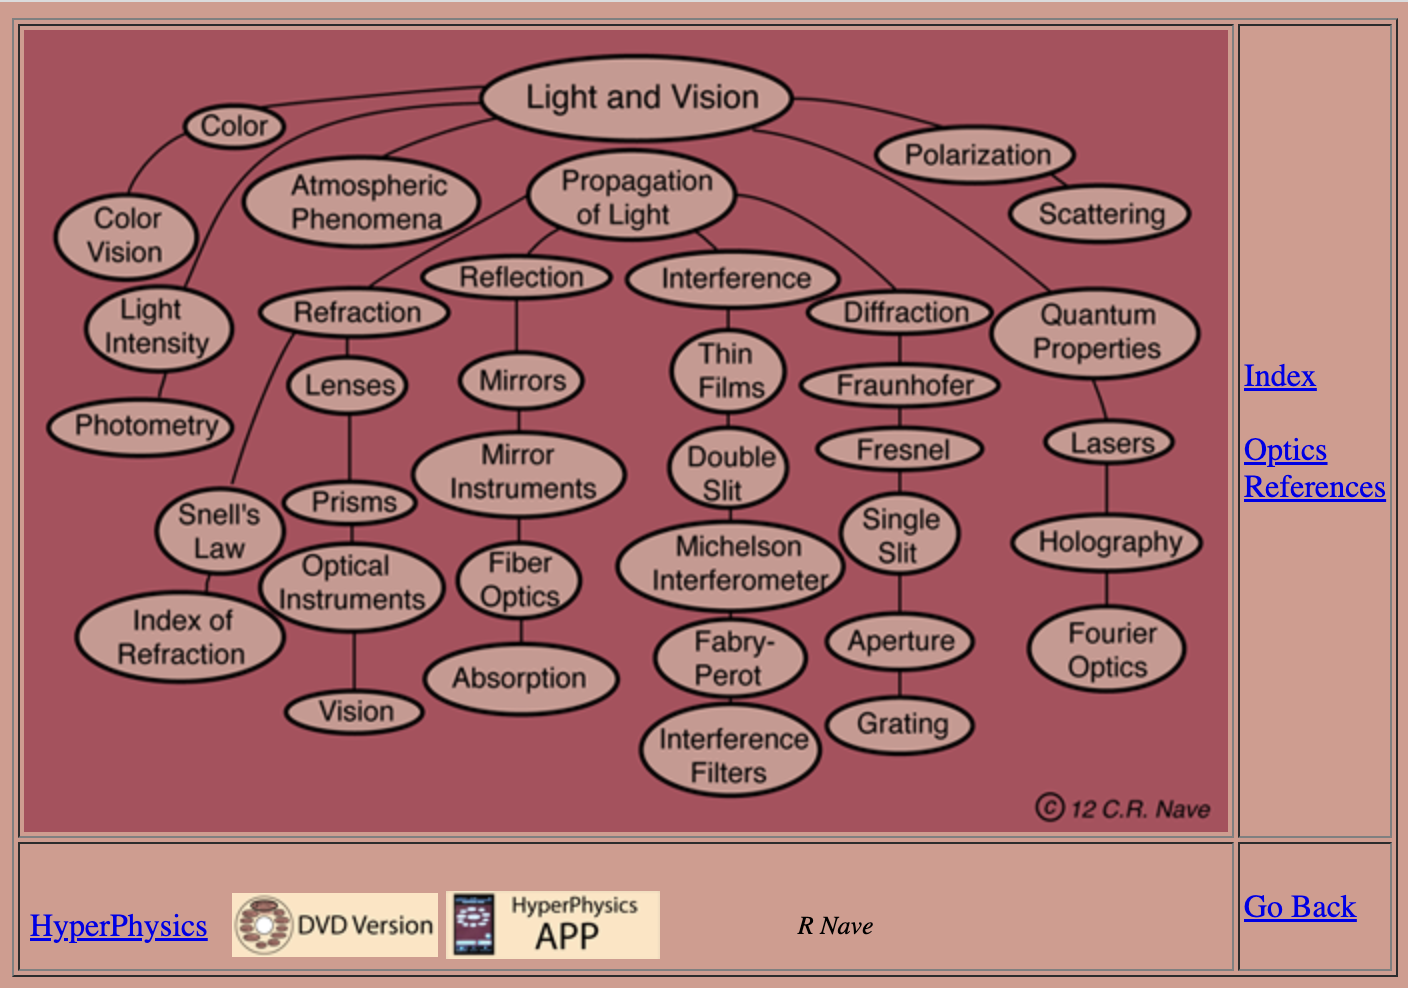 Hyperphysics homepage, with a hierarchical graph that has a parent node of Light & Vision, with child nodes of color, atmospheric phenomena, propagation of light, polarization, and quantum properties. Each child node has one or more hierarchical child nodes, but mostly each child node has only one child, continuing up to 7 layers at the deepest.